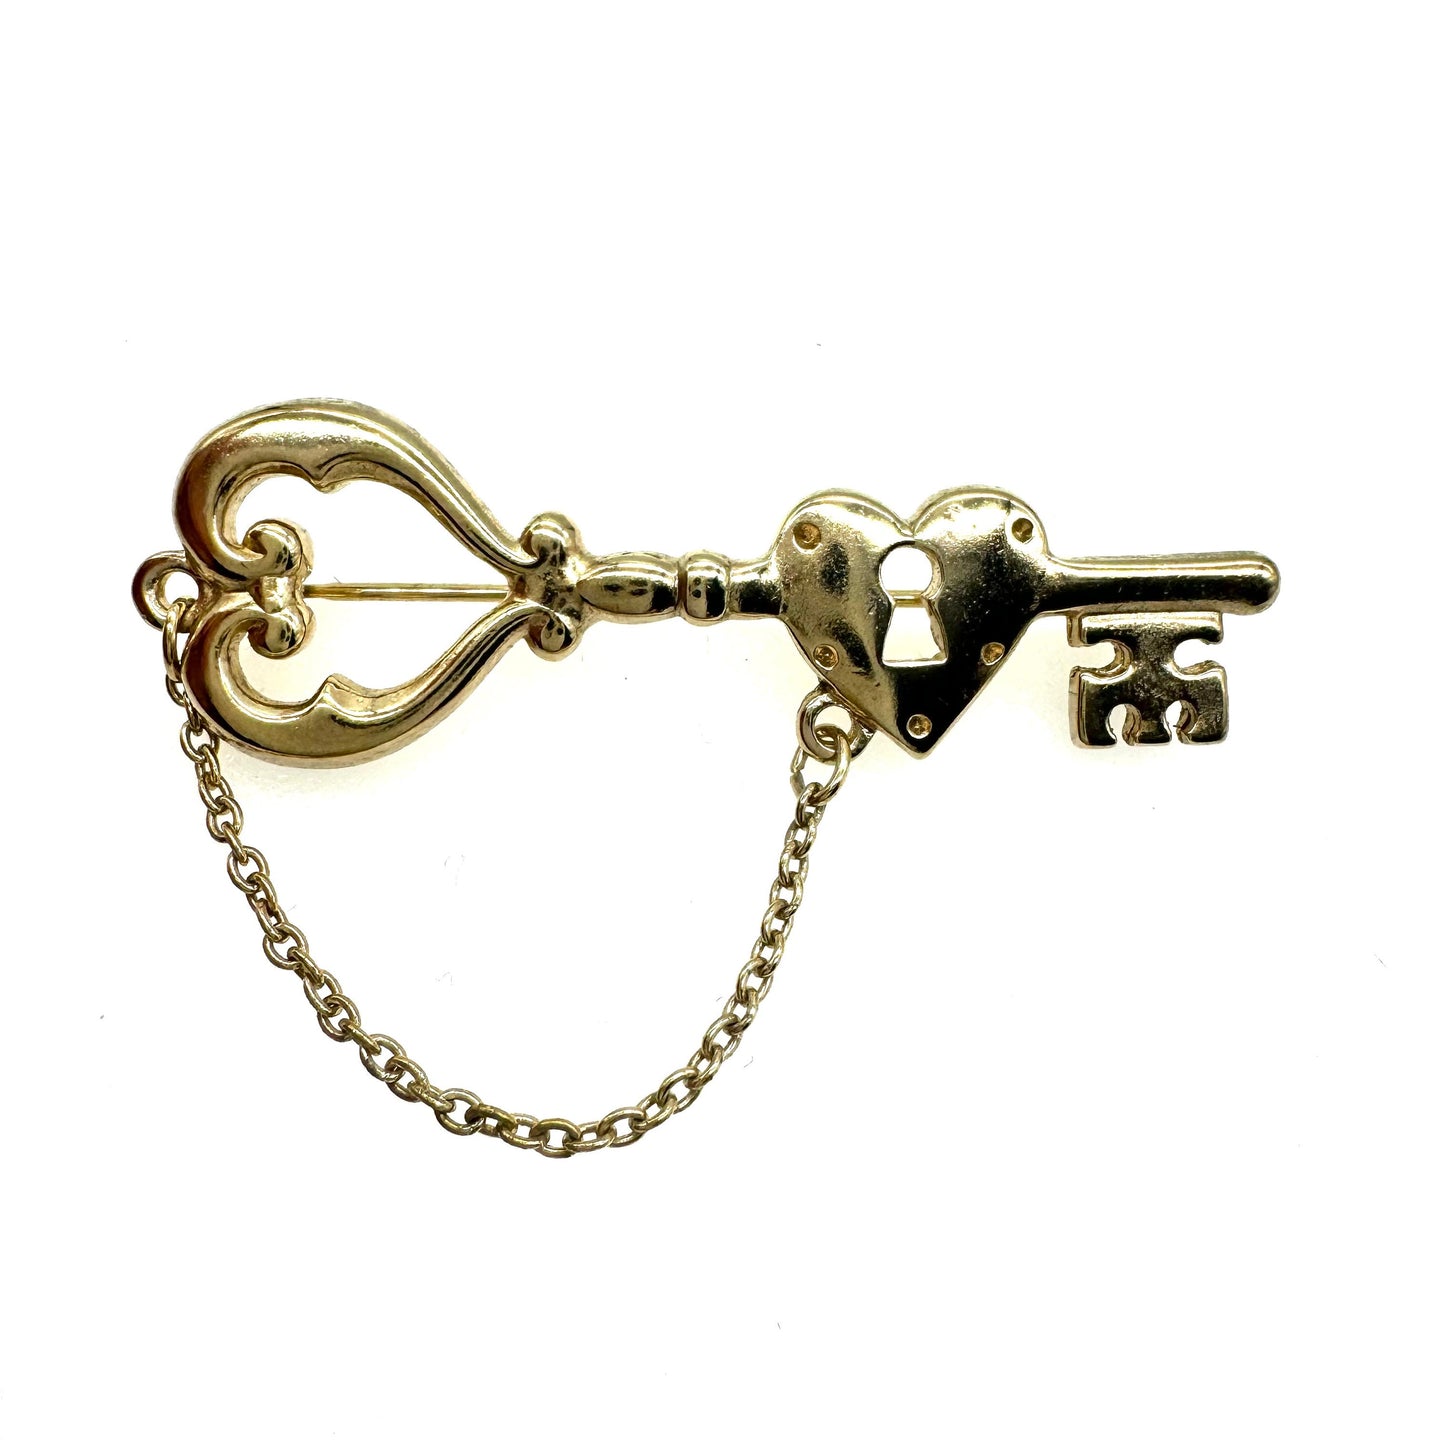 Key and Heart with Keyhole Brooch with Safety Chain for Decorative Effect